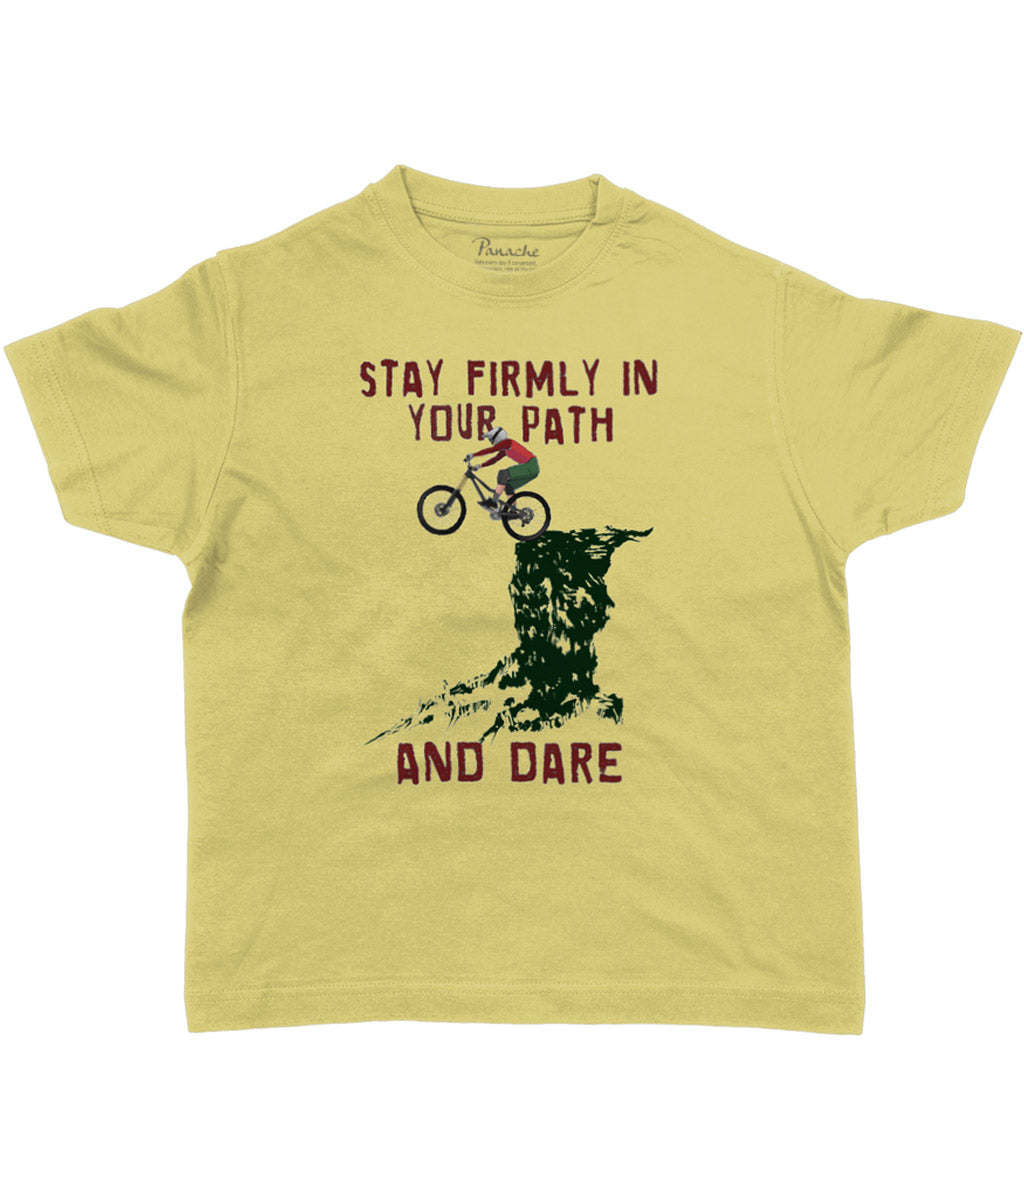 Stay Firmly in Your Path and Dare Kids Cycling T-shirt Dark Yellow